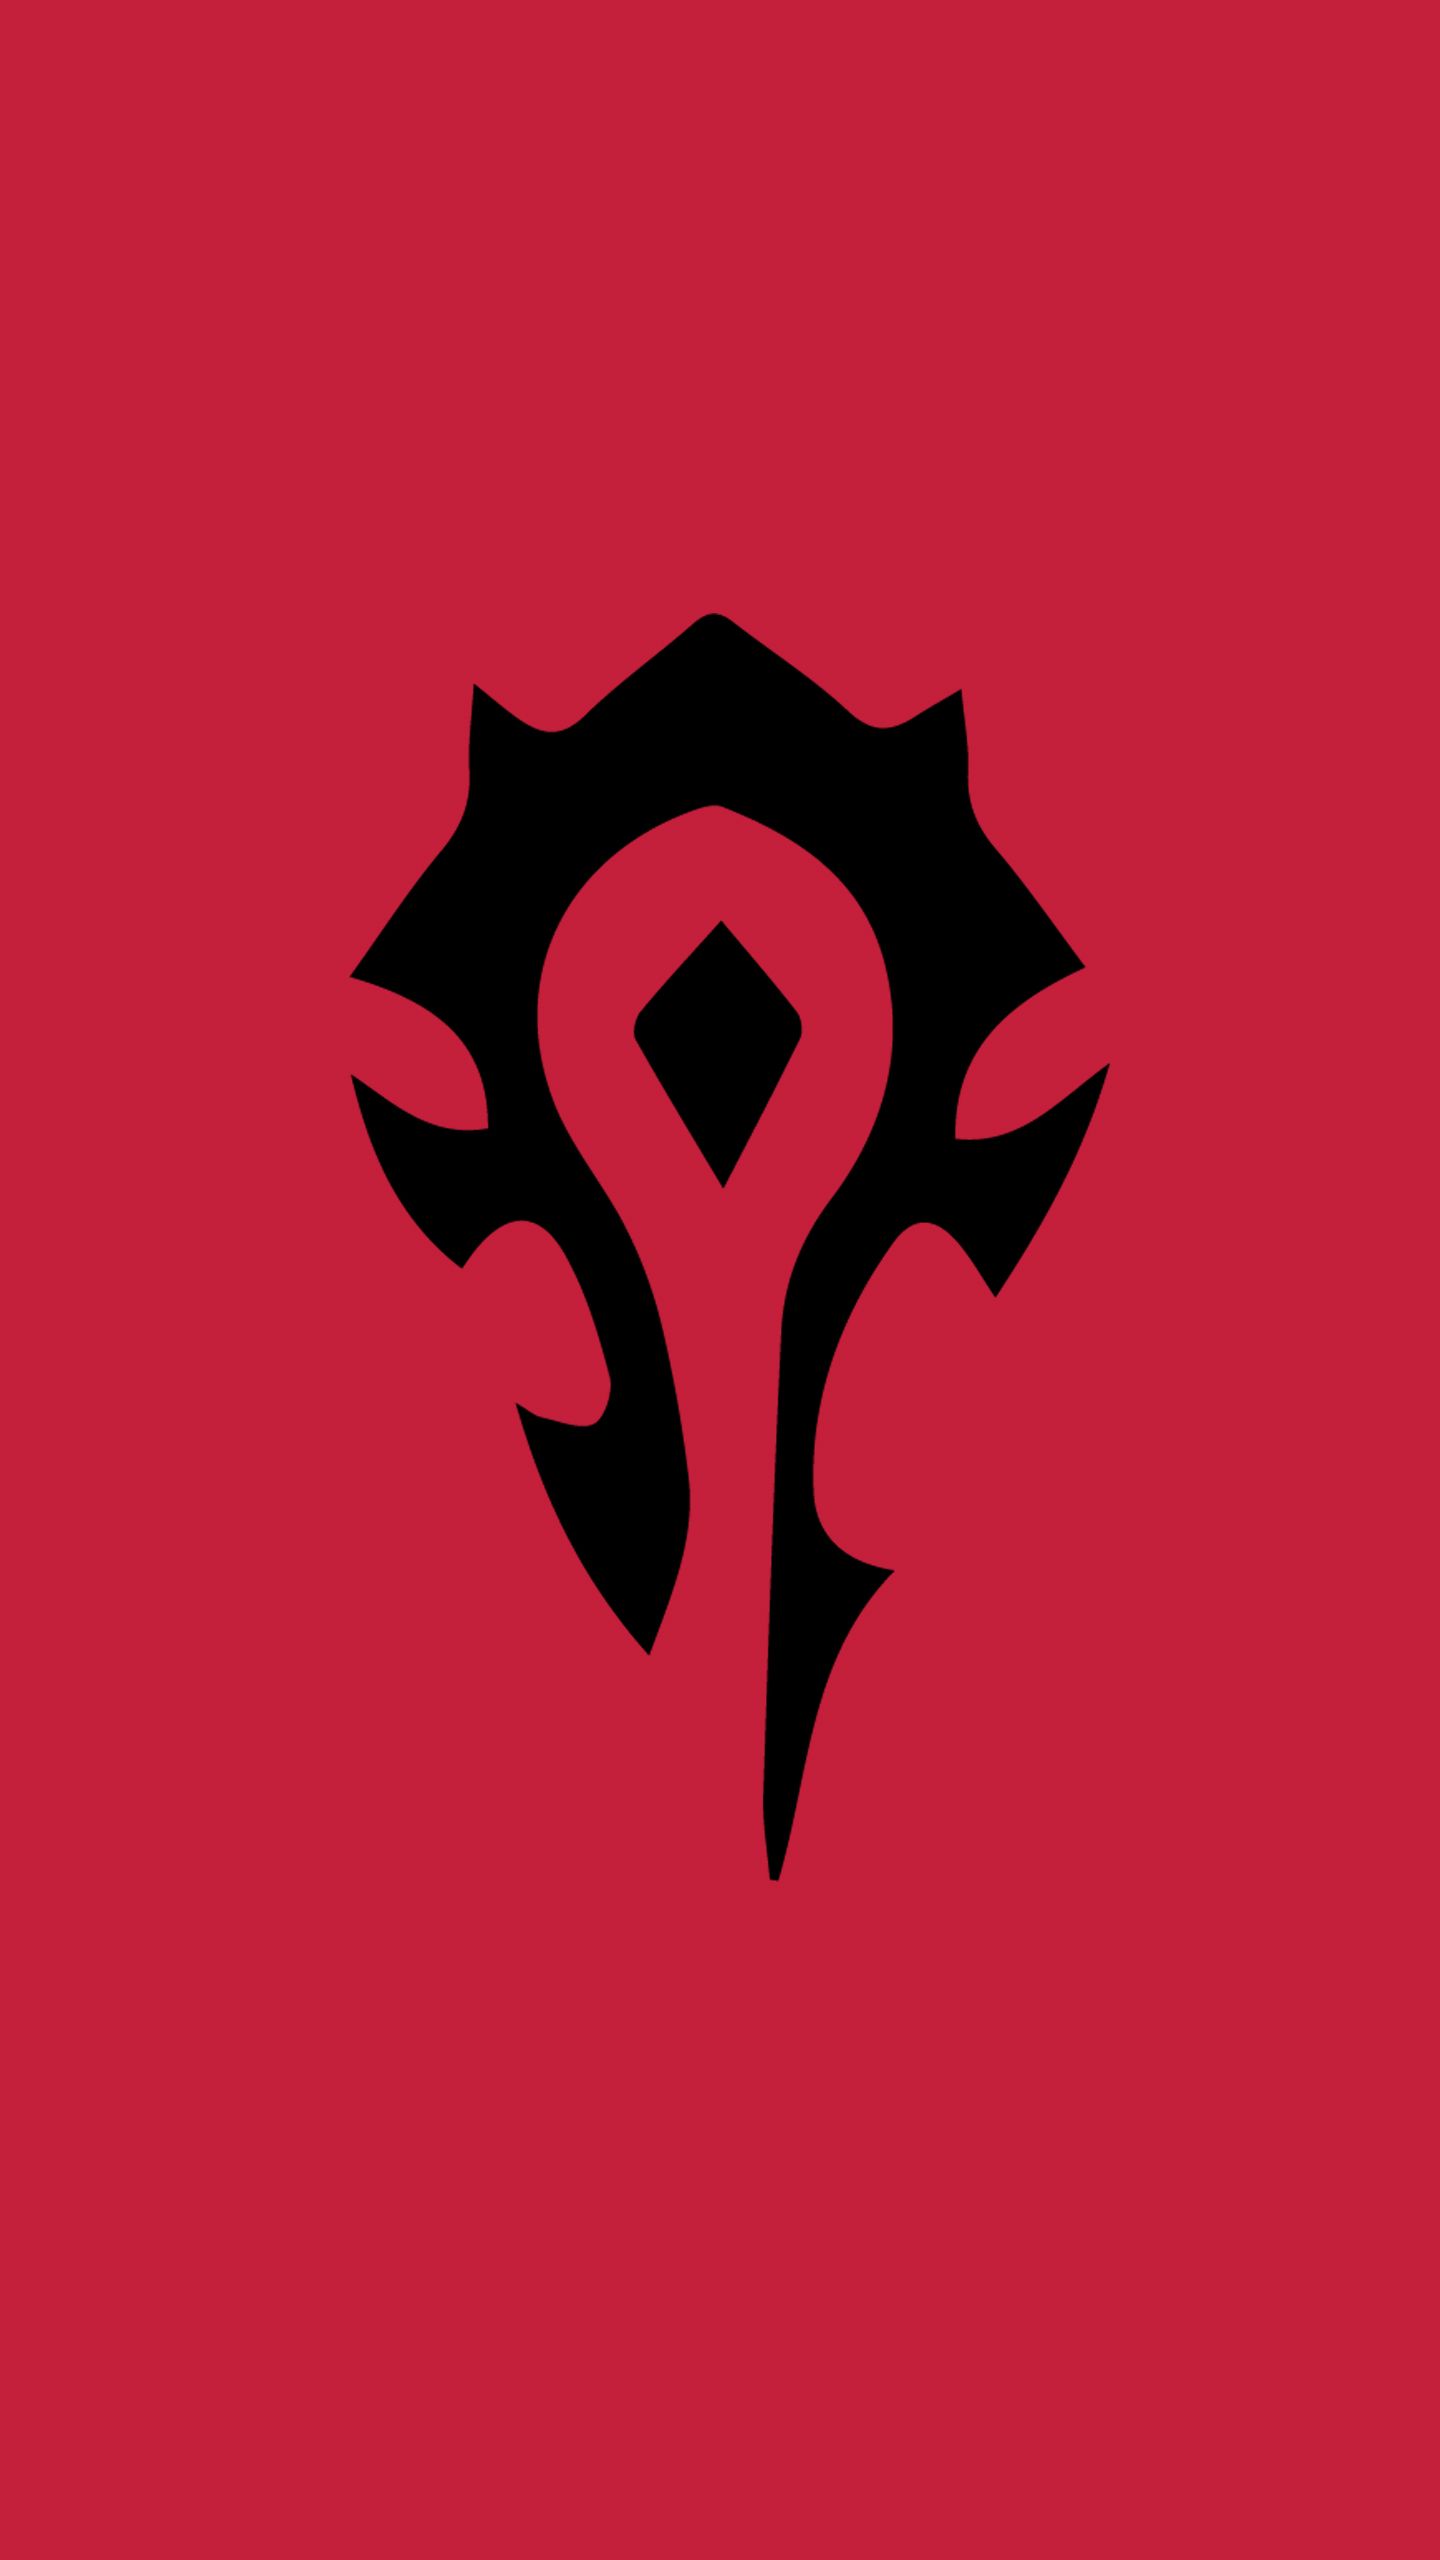 Made a Horde phone wallpaper for myself, thought I'd share